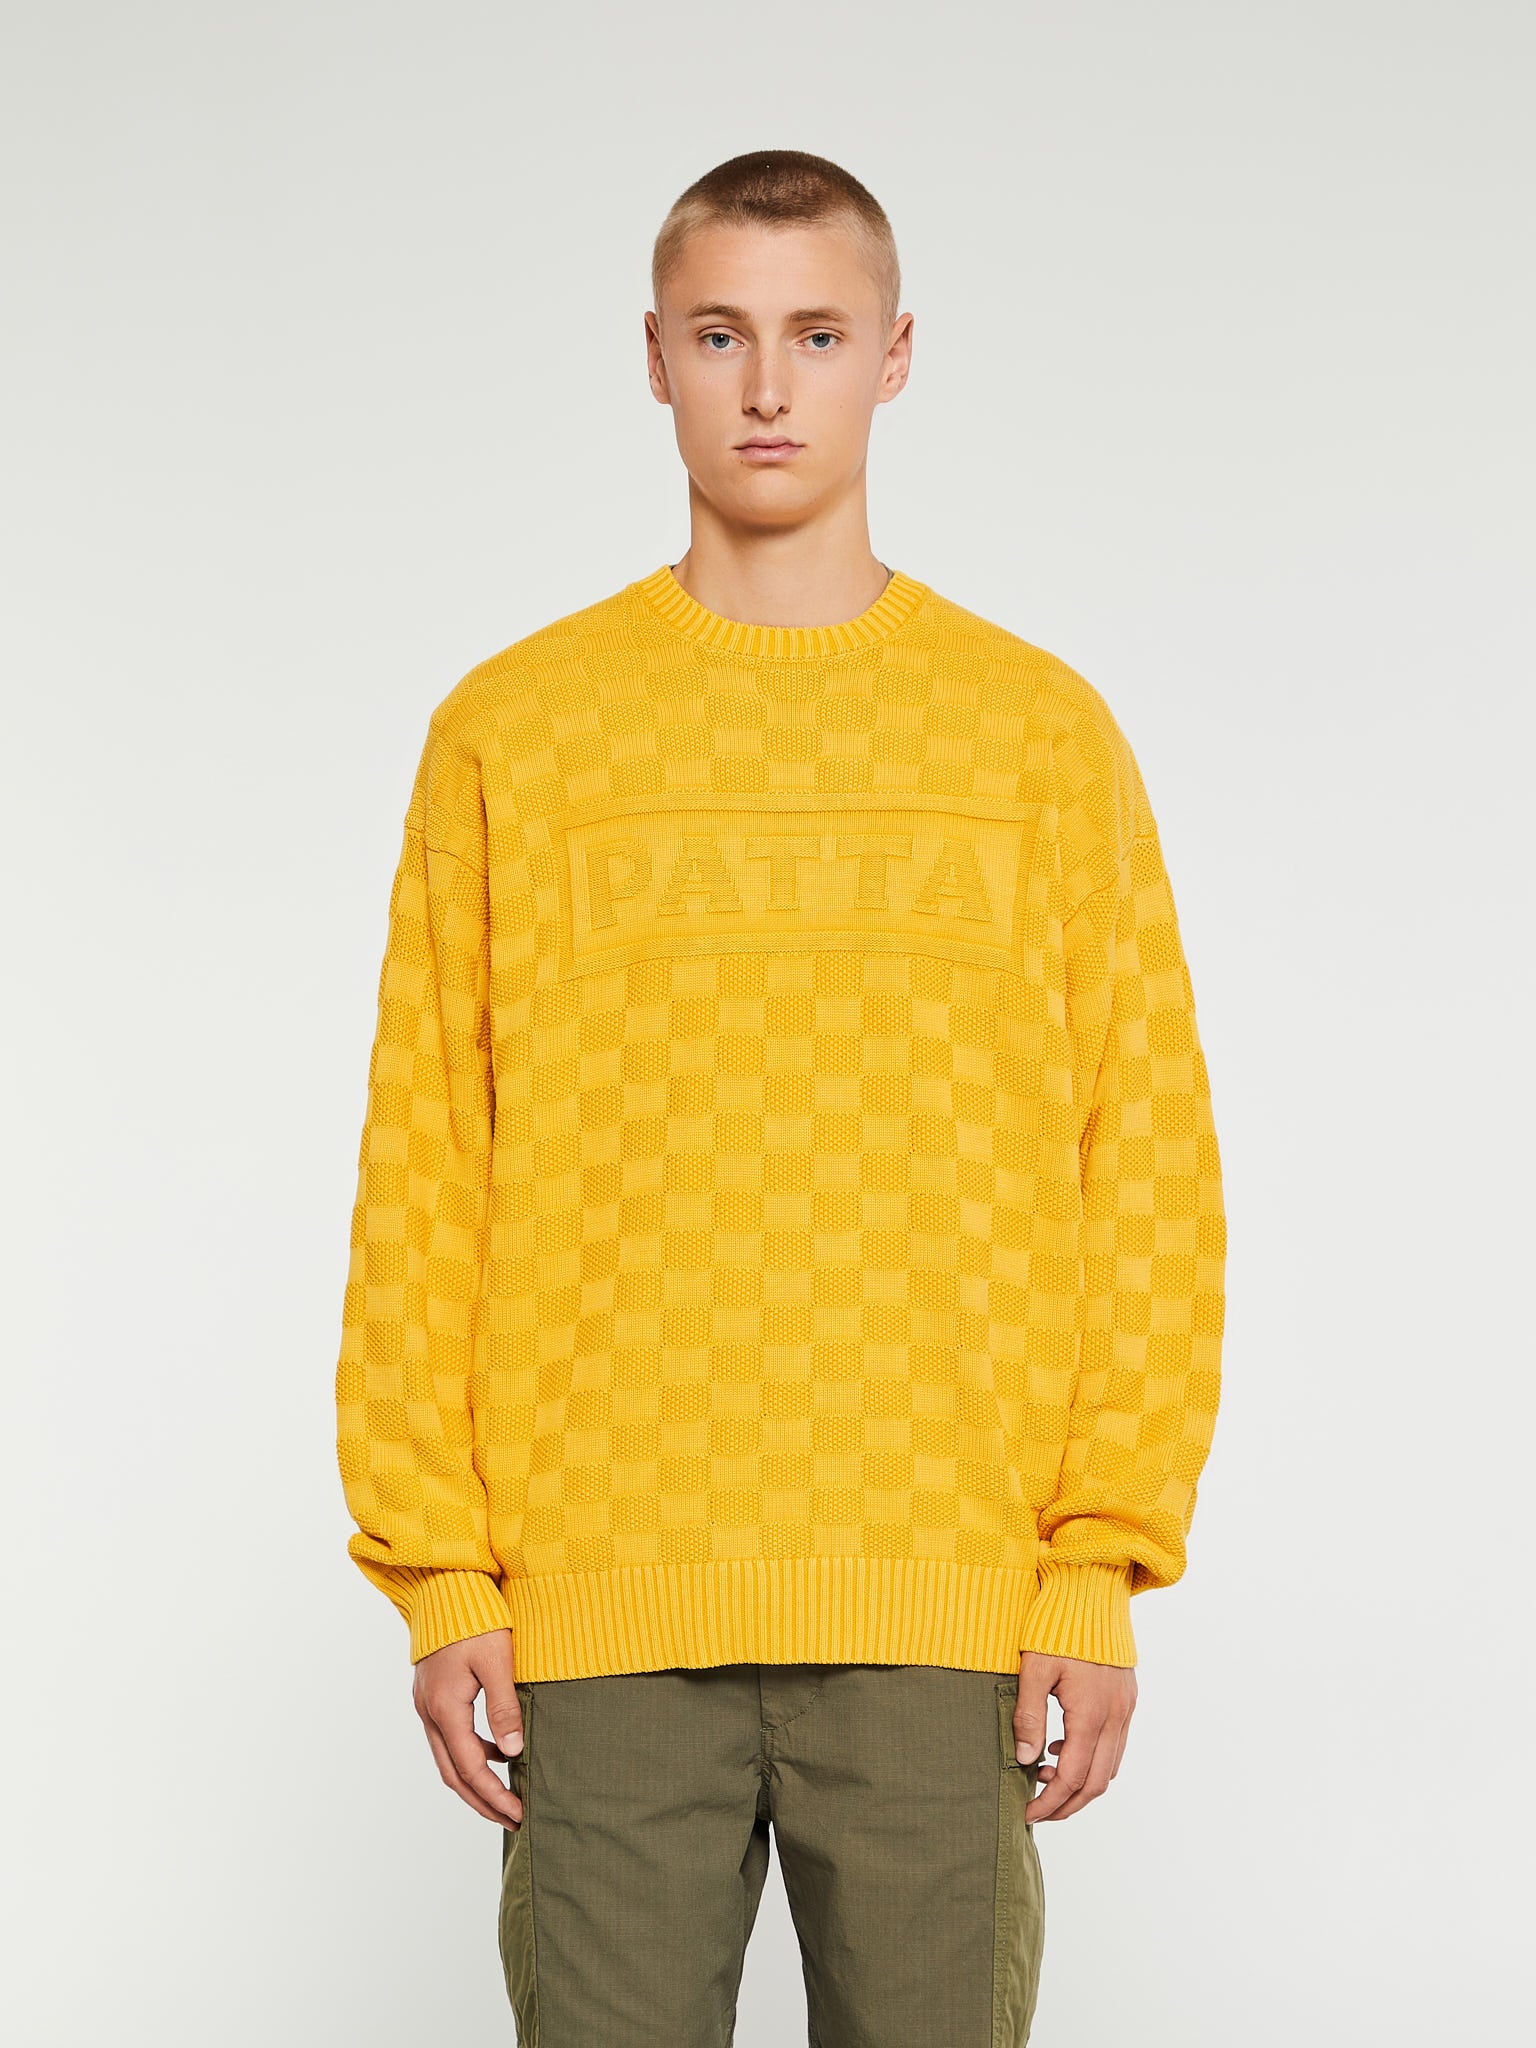 Patta - Purl Ribbed Sweater in Old Gold